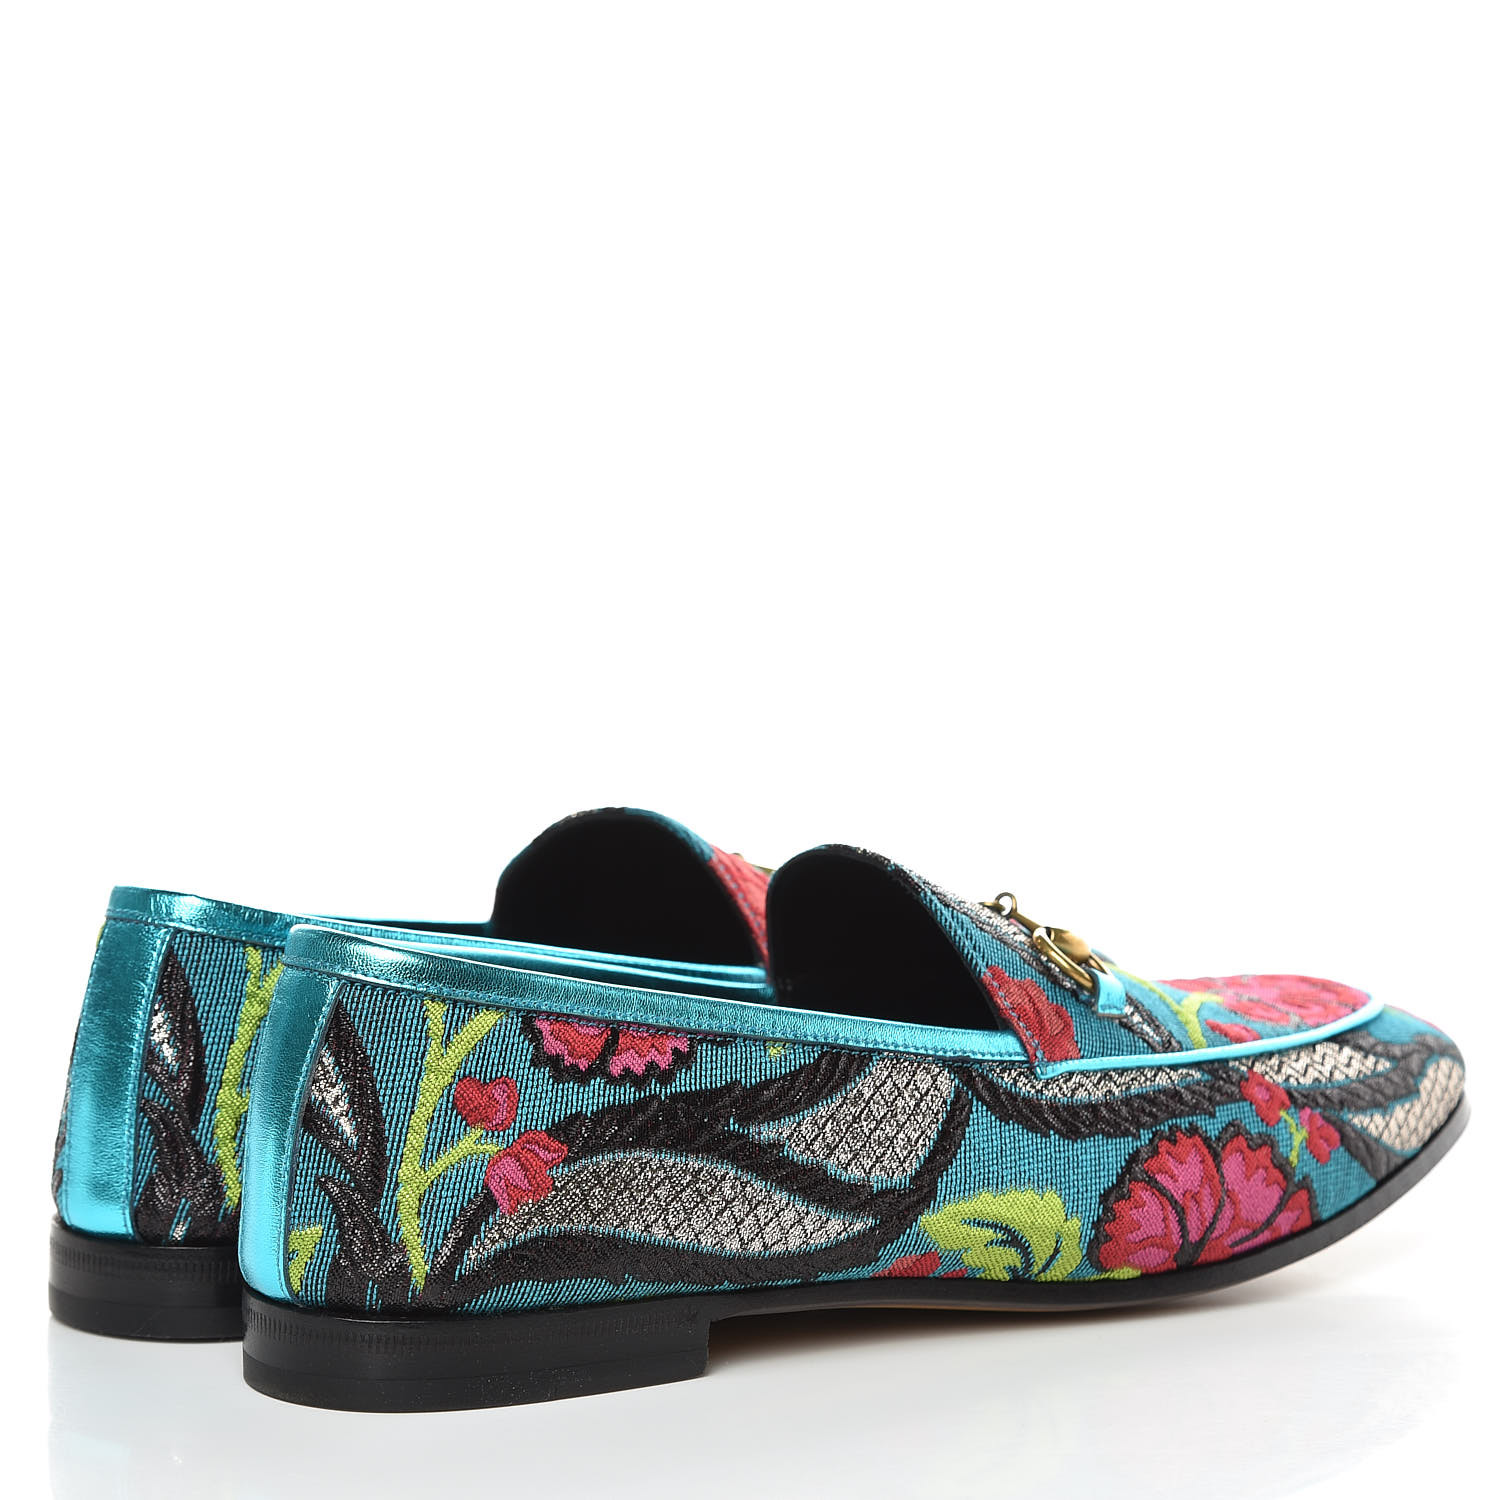 GUCCI Floral Jacquard Horsebit Womens Jordaan Loafers 40.5 Turquoise ...